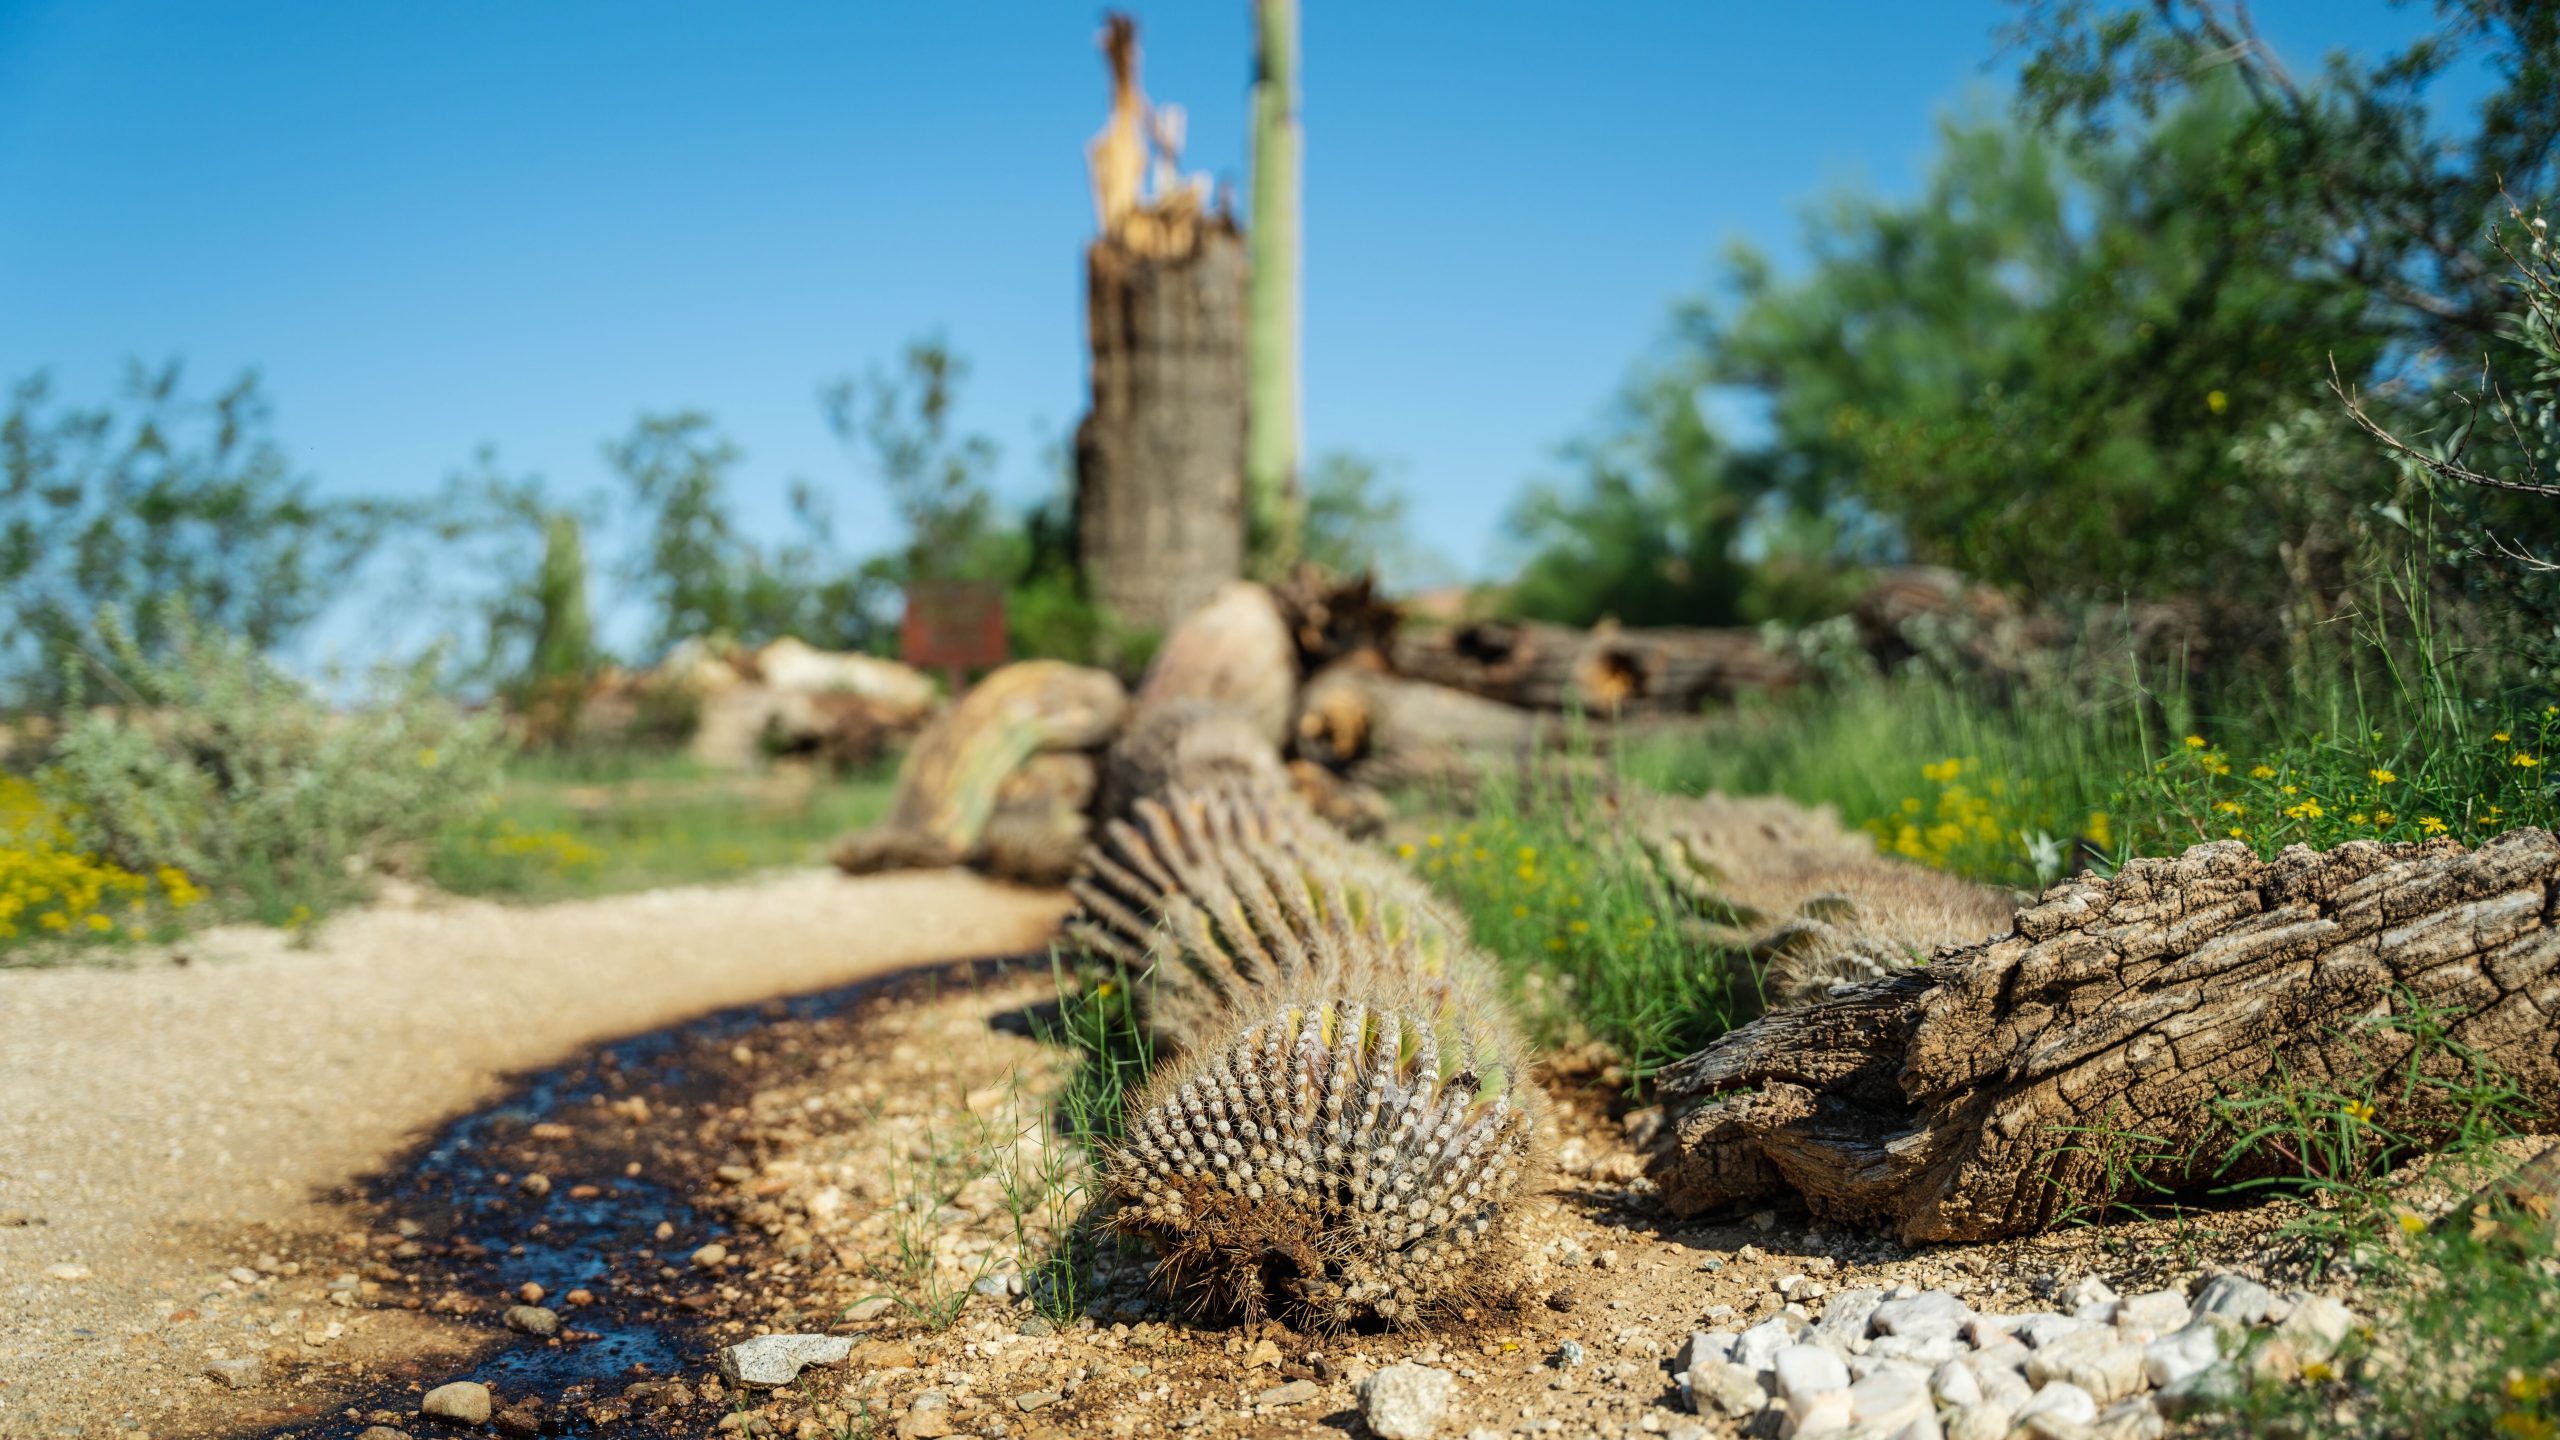 Strong Arm, a well-known saguaro cactus in the Tortolita Preserve near Marana, was estimated to be 150 to 200 years old and 40 feet tall when it toppled during an August storm. But the actual cause of death was Erwinia cacticida, a bacteria that causes saguaros to rot and ooze a thick, black liquid. 